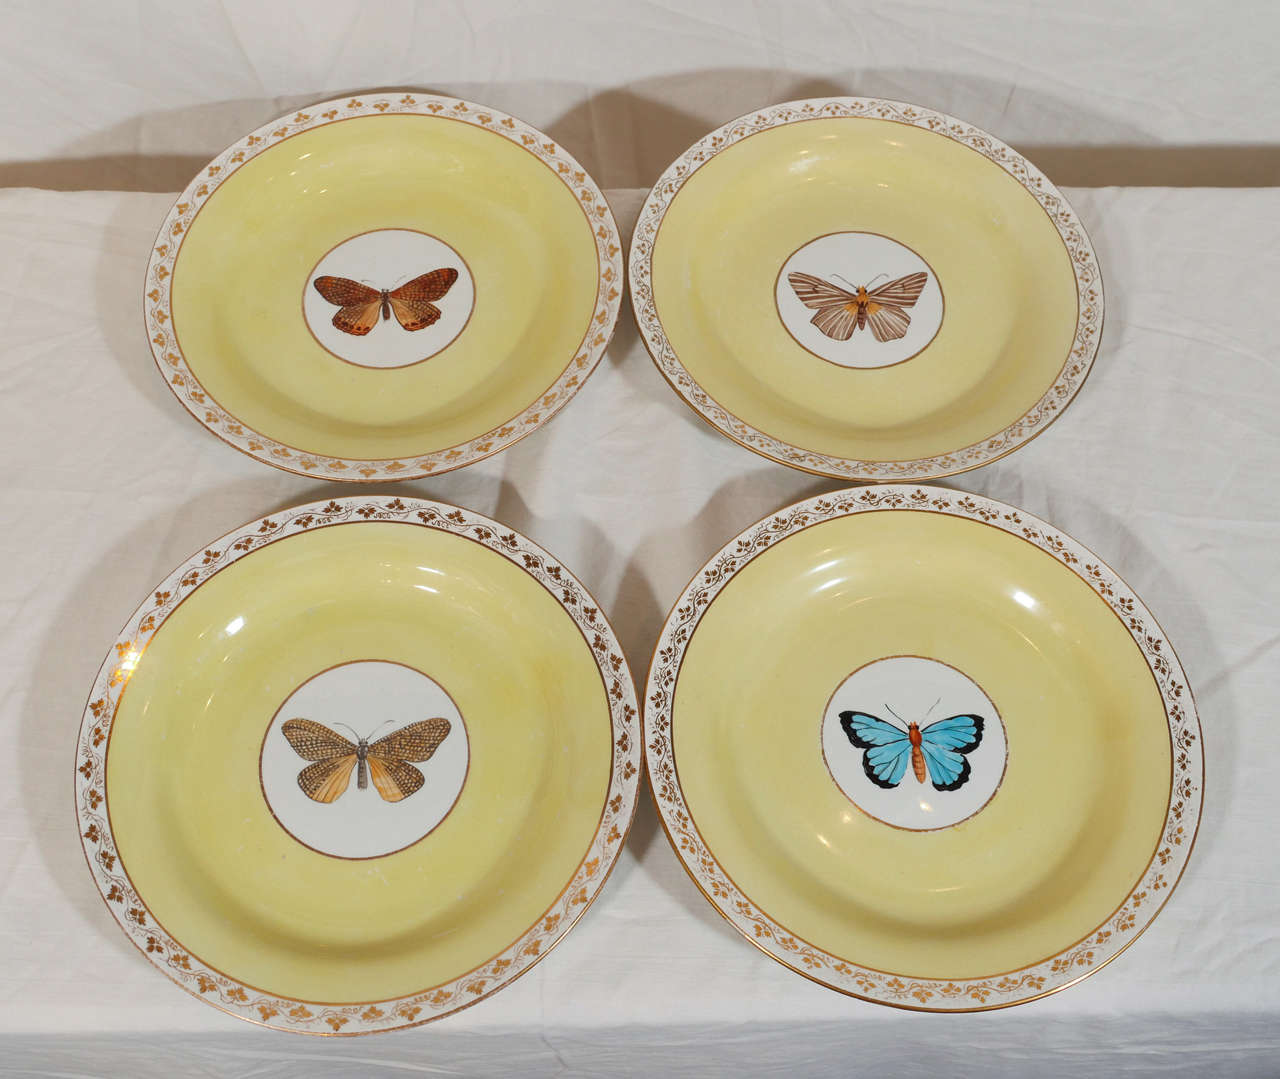 Set of Ten Wedgwood Dishes with Butterflies 2